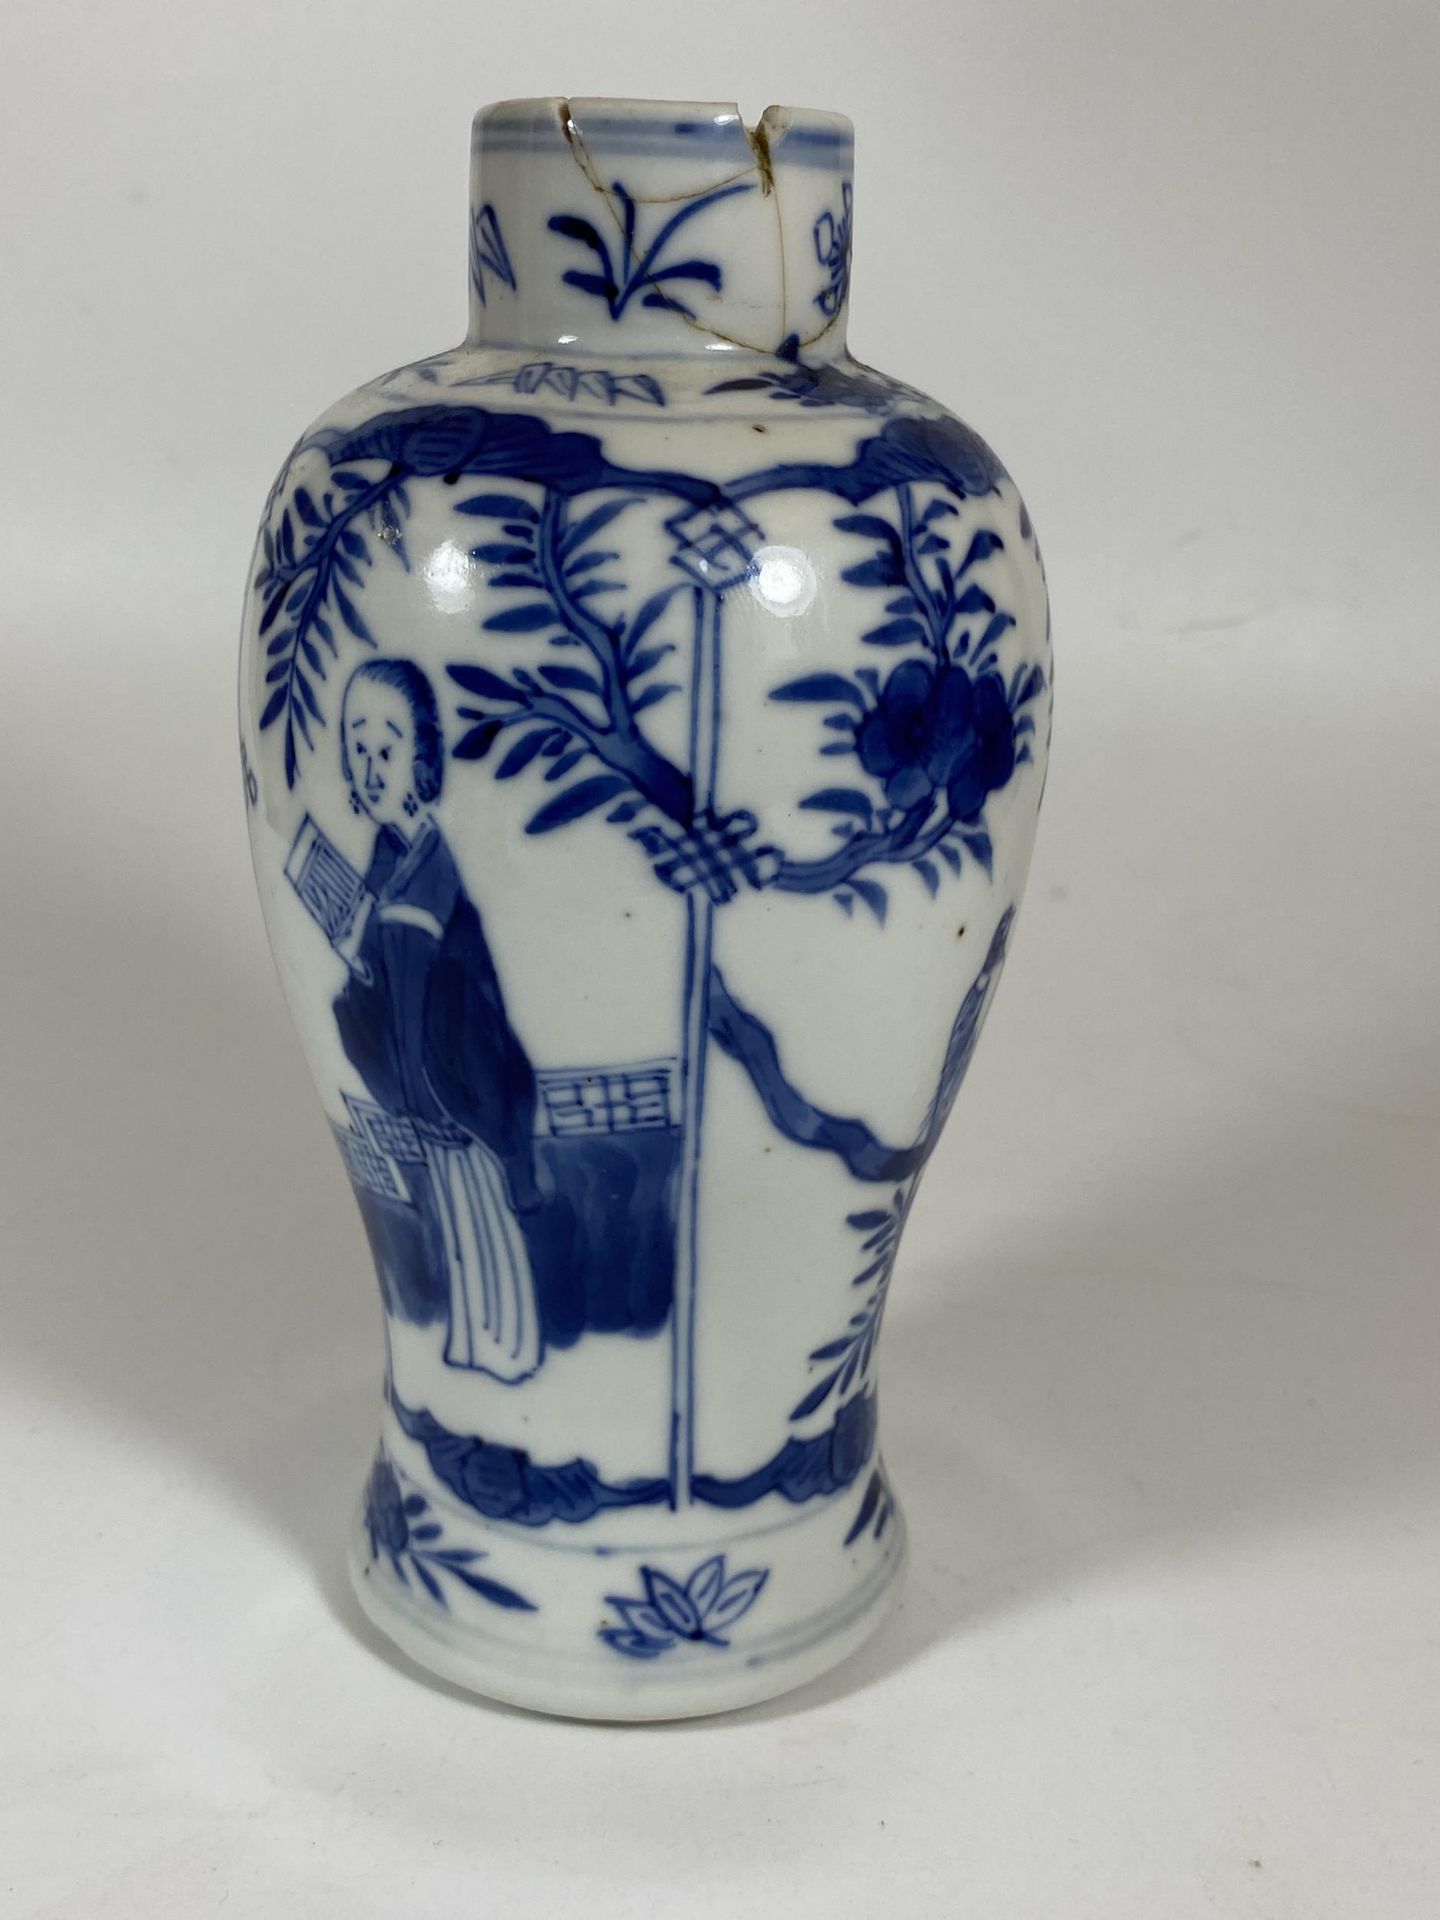 A LATE 19TH CENTURY CHINESE KANGXI STYLE BLUE AND WHITE FIGURAL DESIGN VASE, HEIGHT 18CM - Image 3 of 6